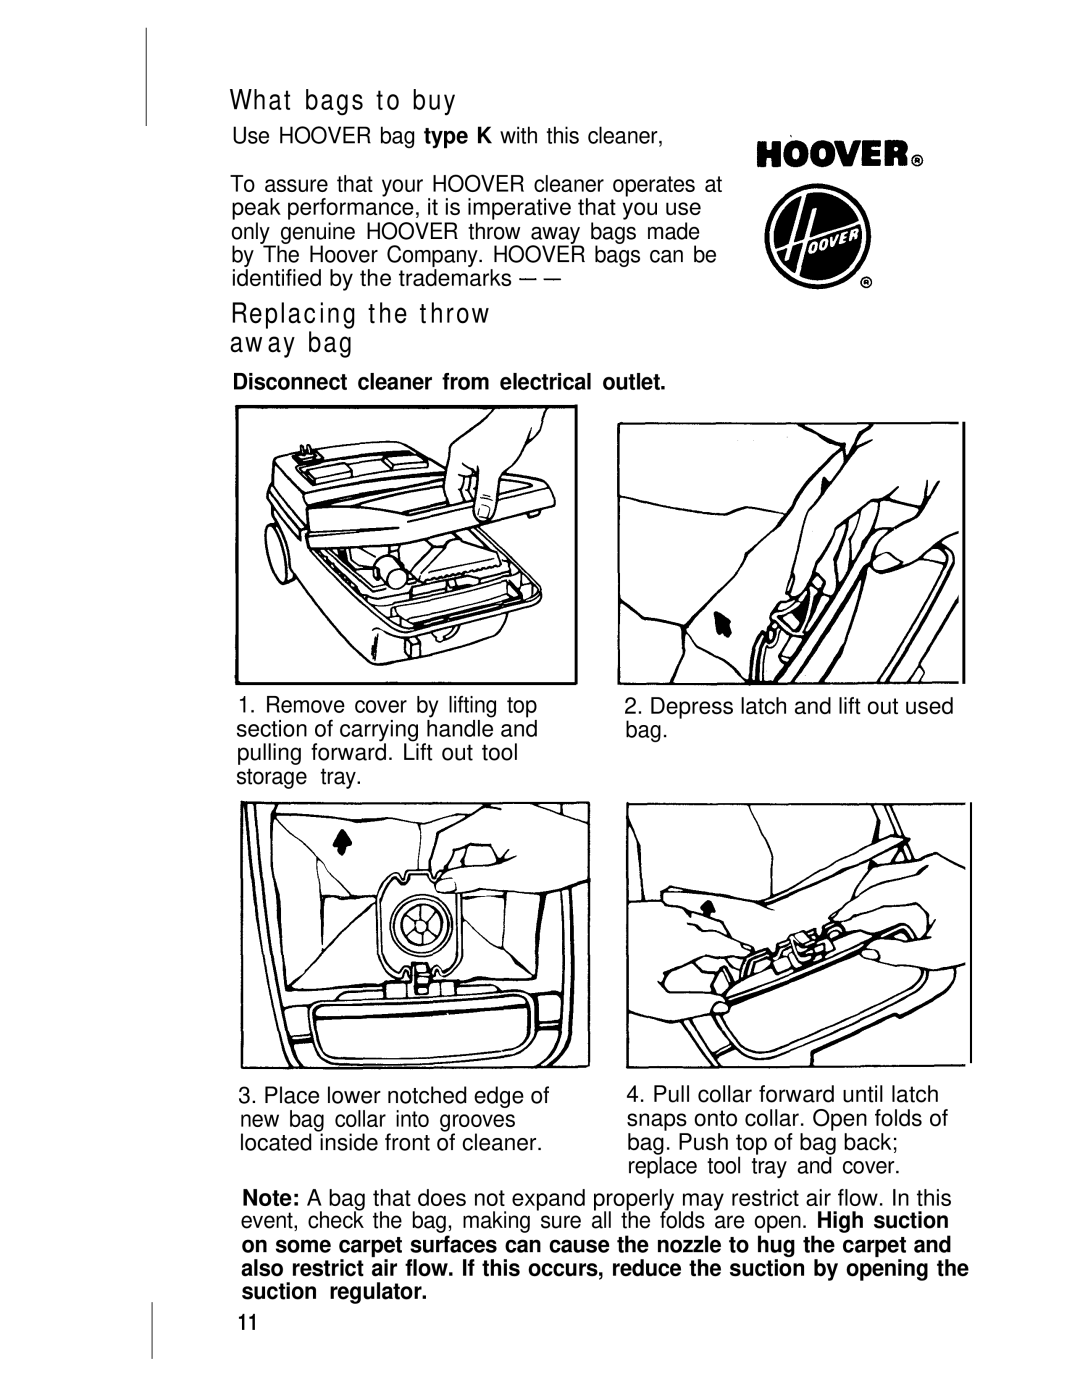 Hoover s3503 owner manual What bags to buy, Replacing the throw away bag, Disconnect cleaner from electrical outlet 